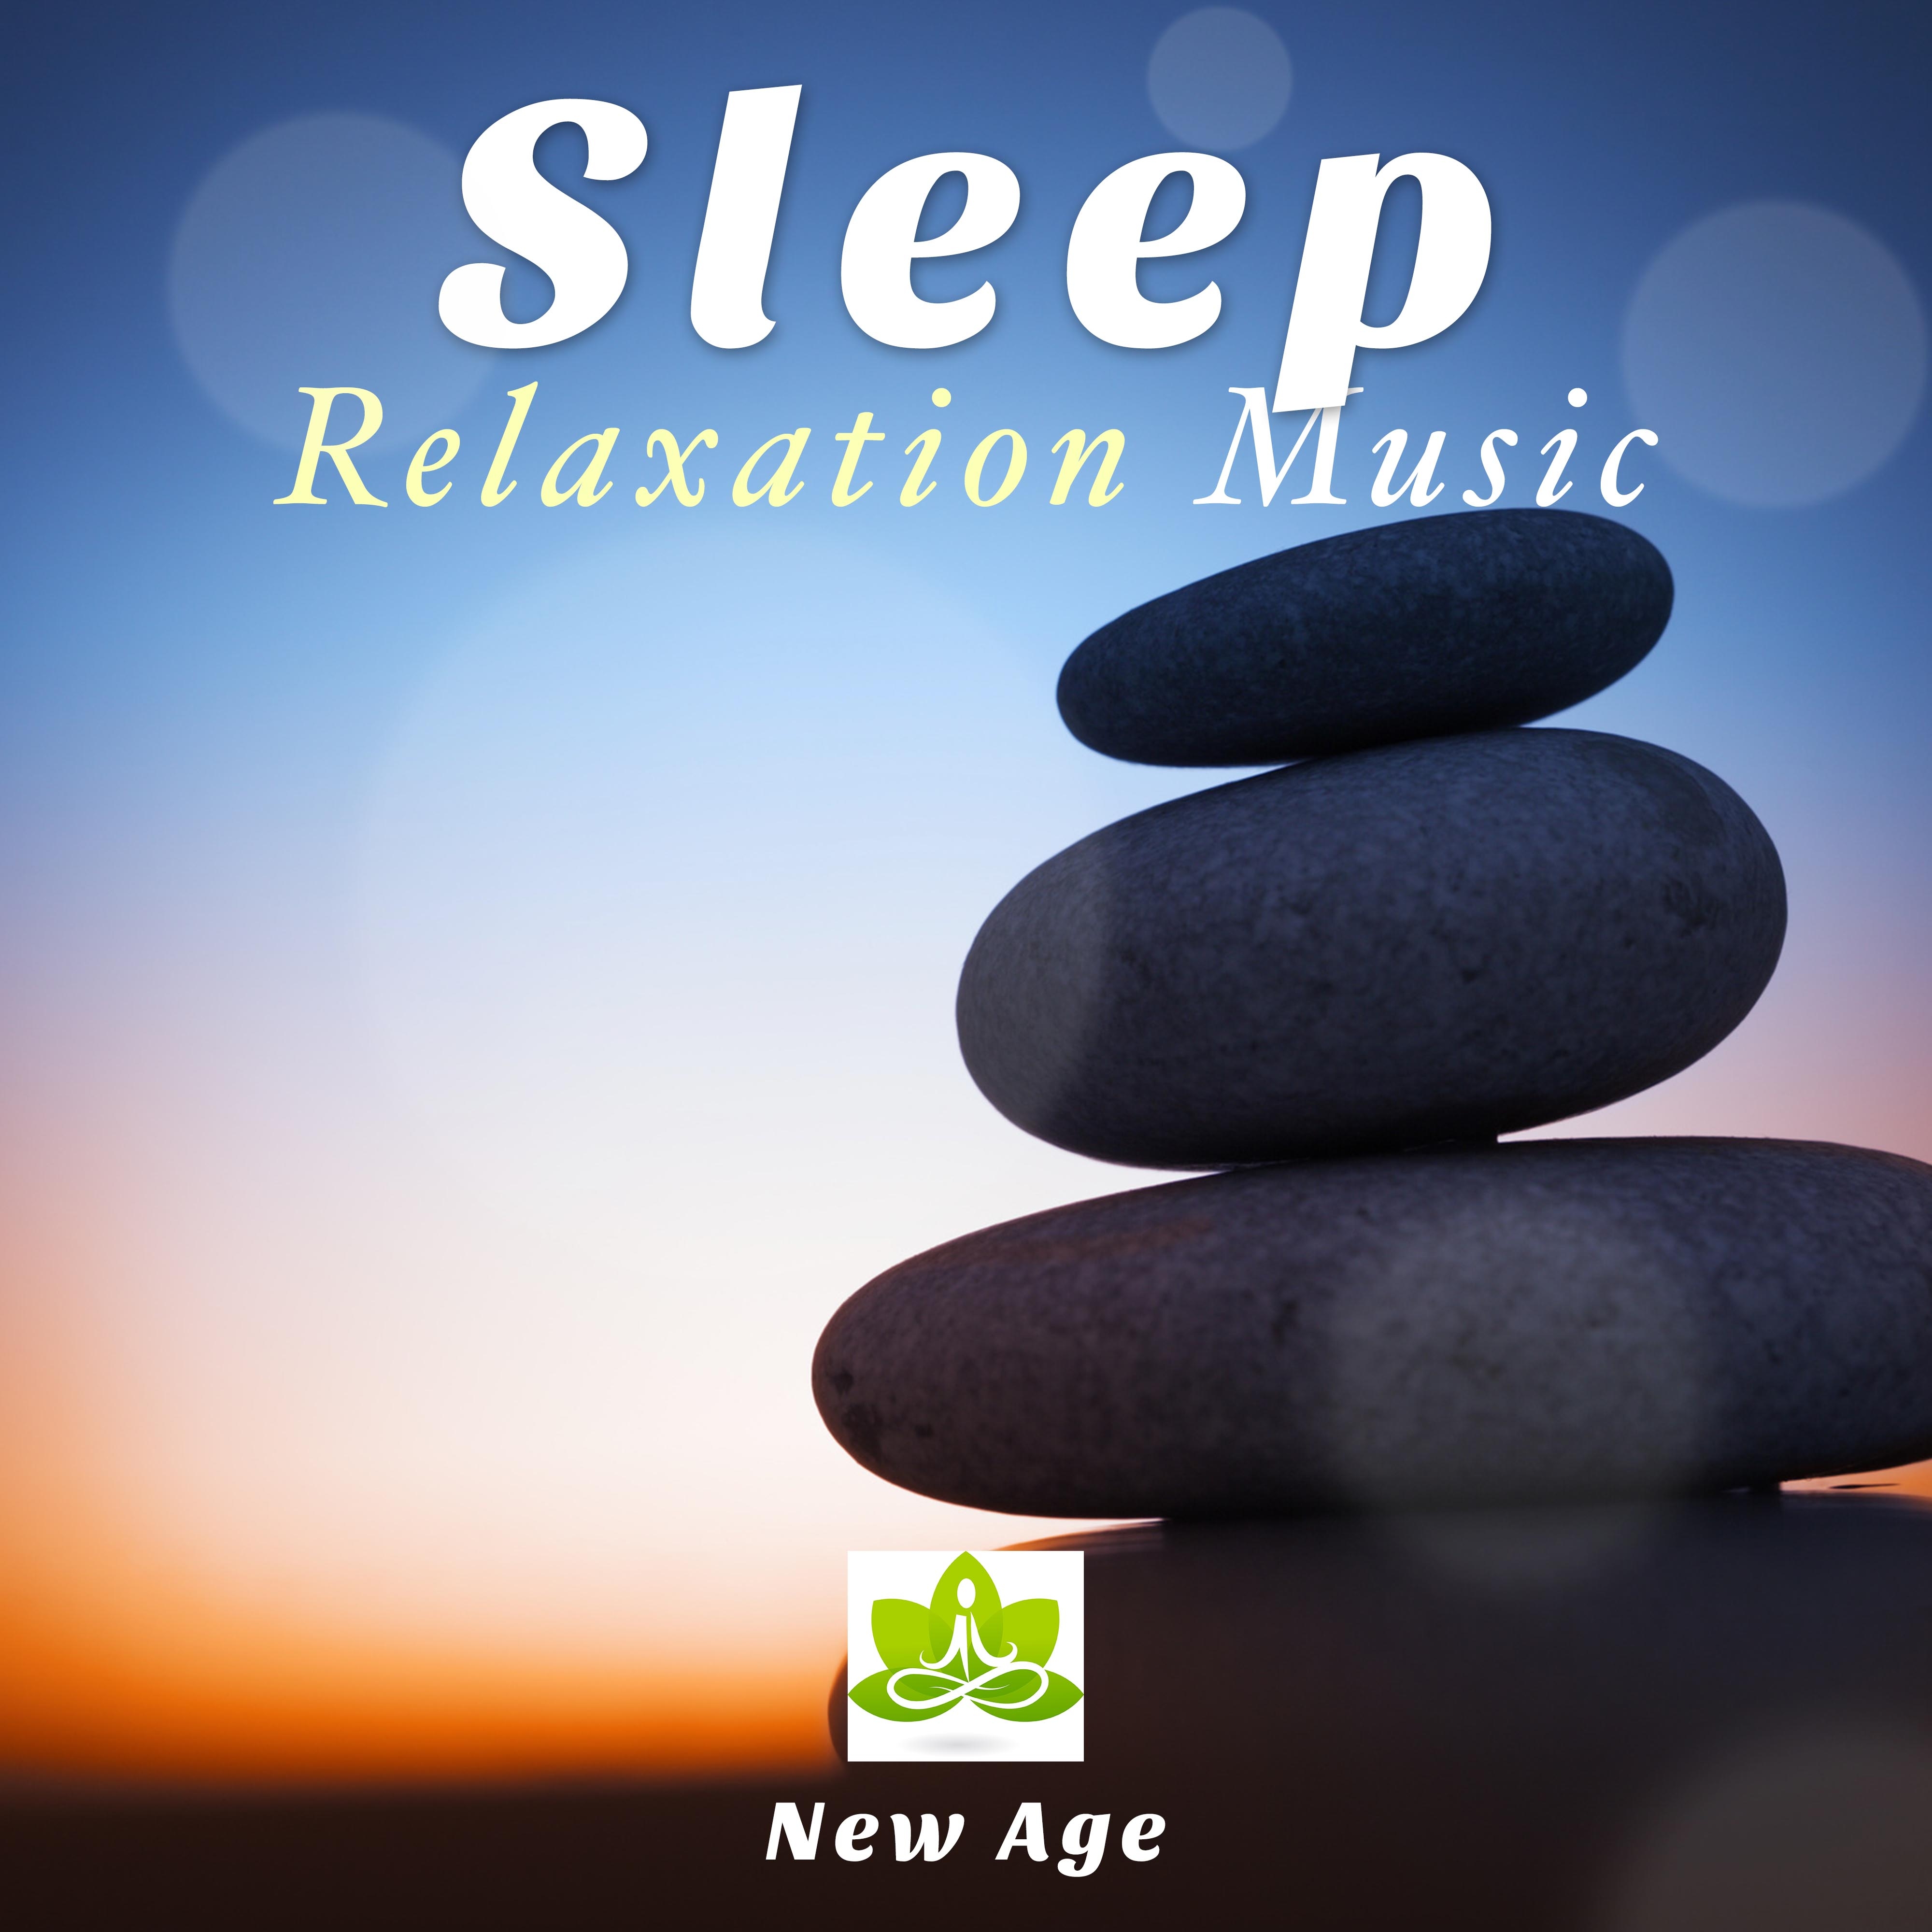 Meditation: Music to Calm the Mind